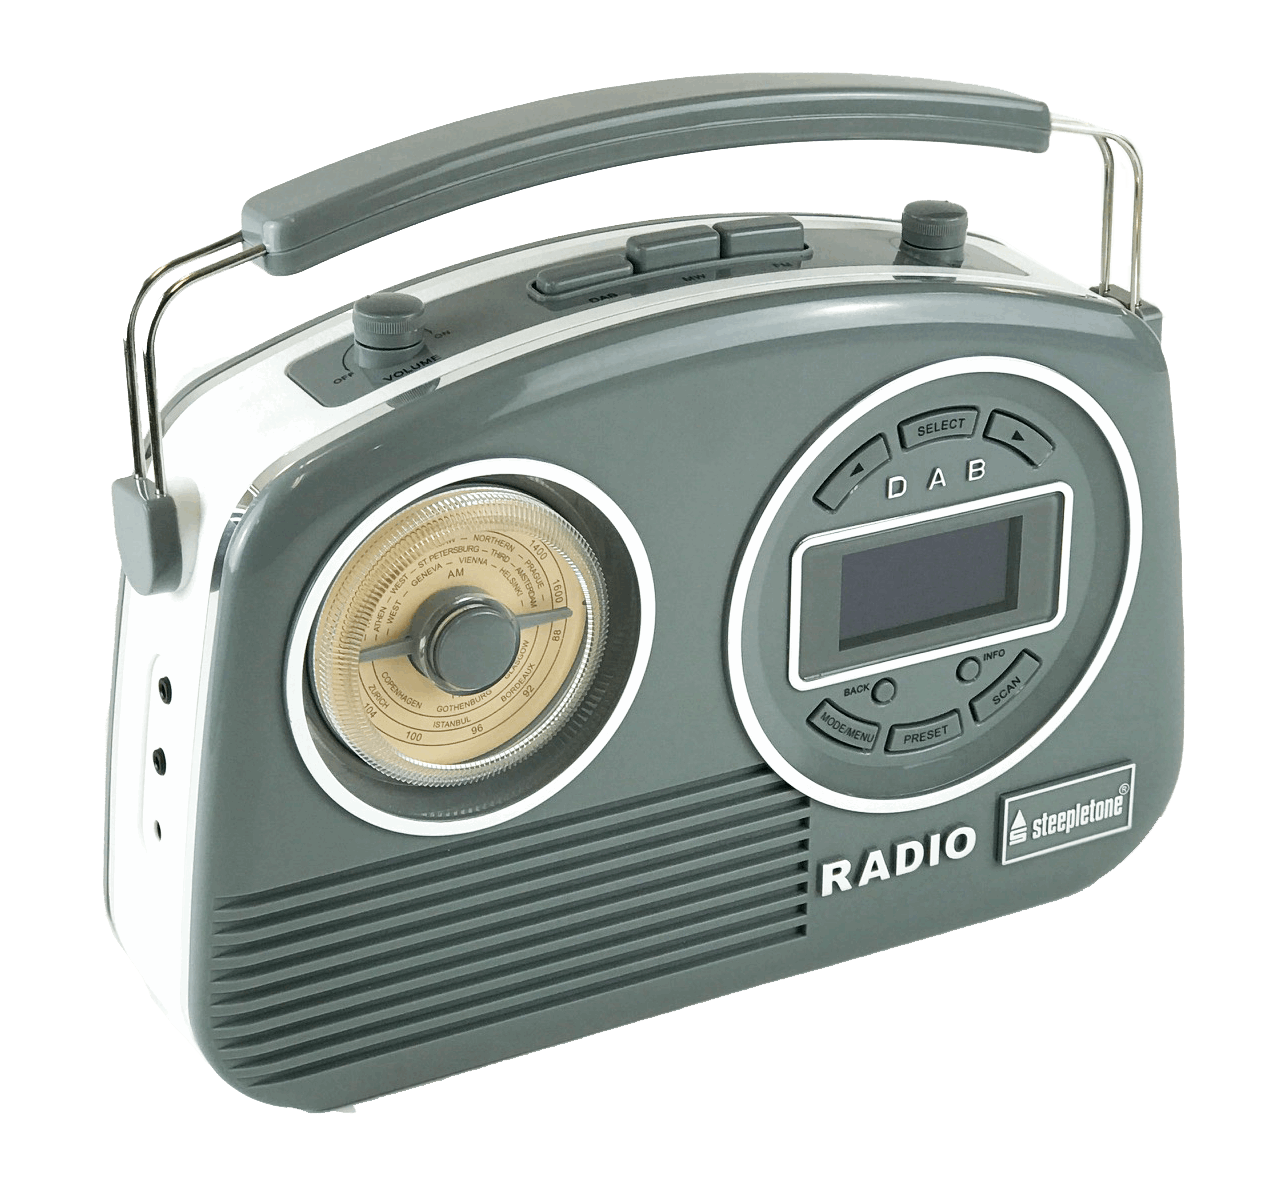 DEVON DAB Retro Style DAB Radio, with FM, large display and buttons.